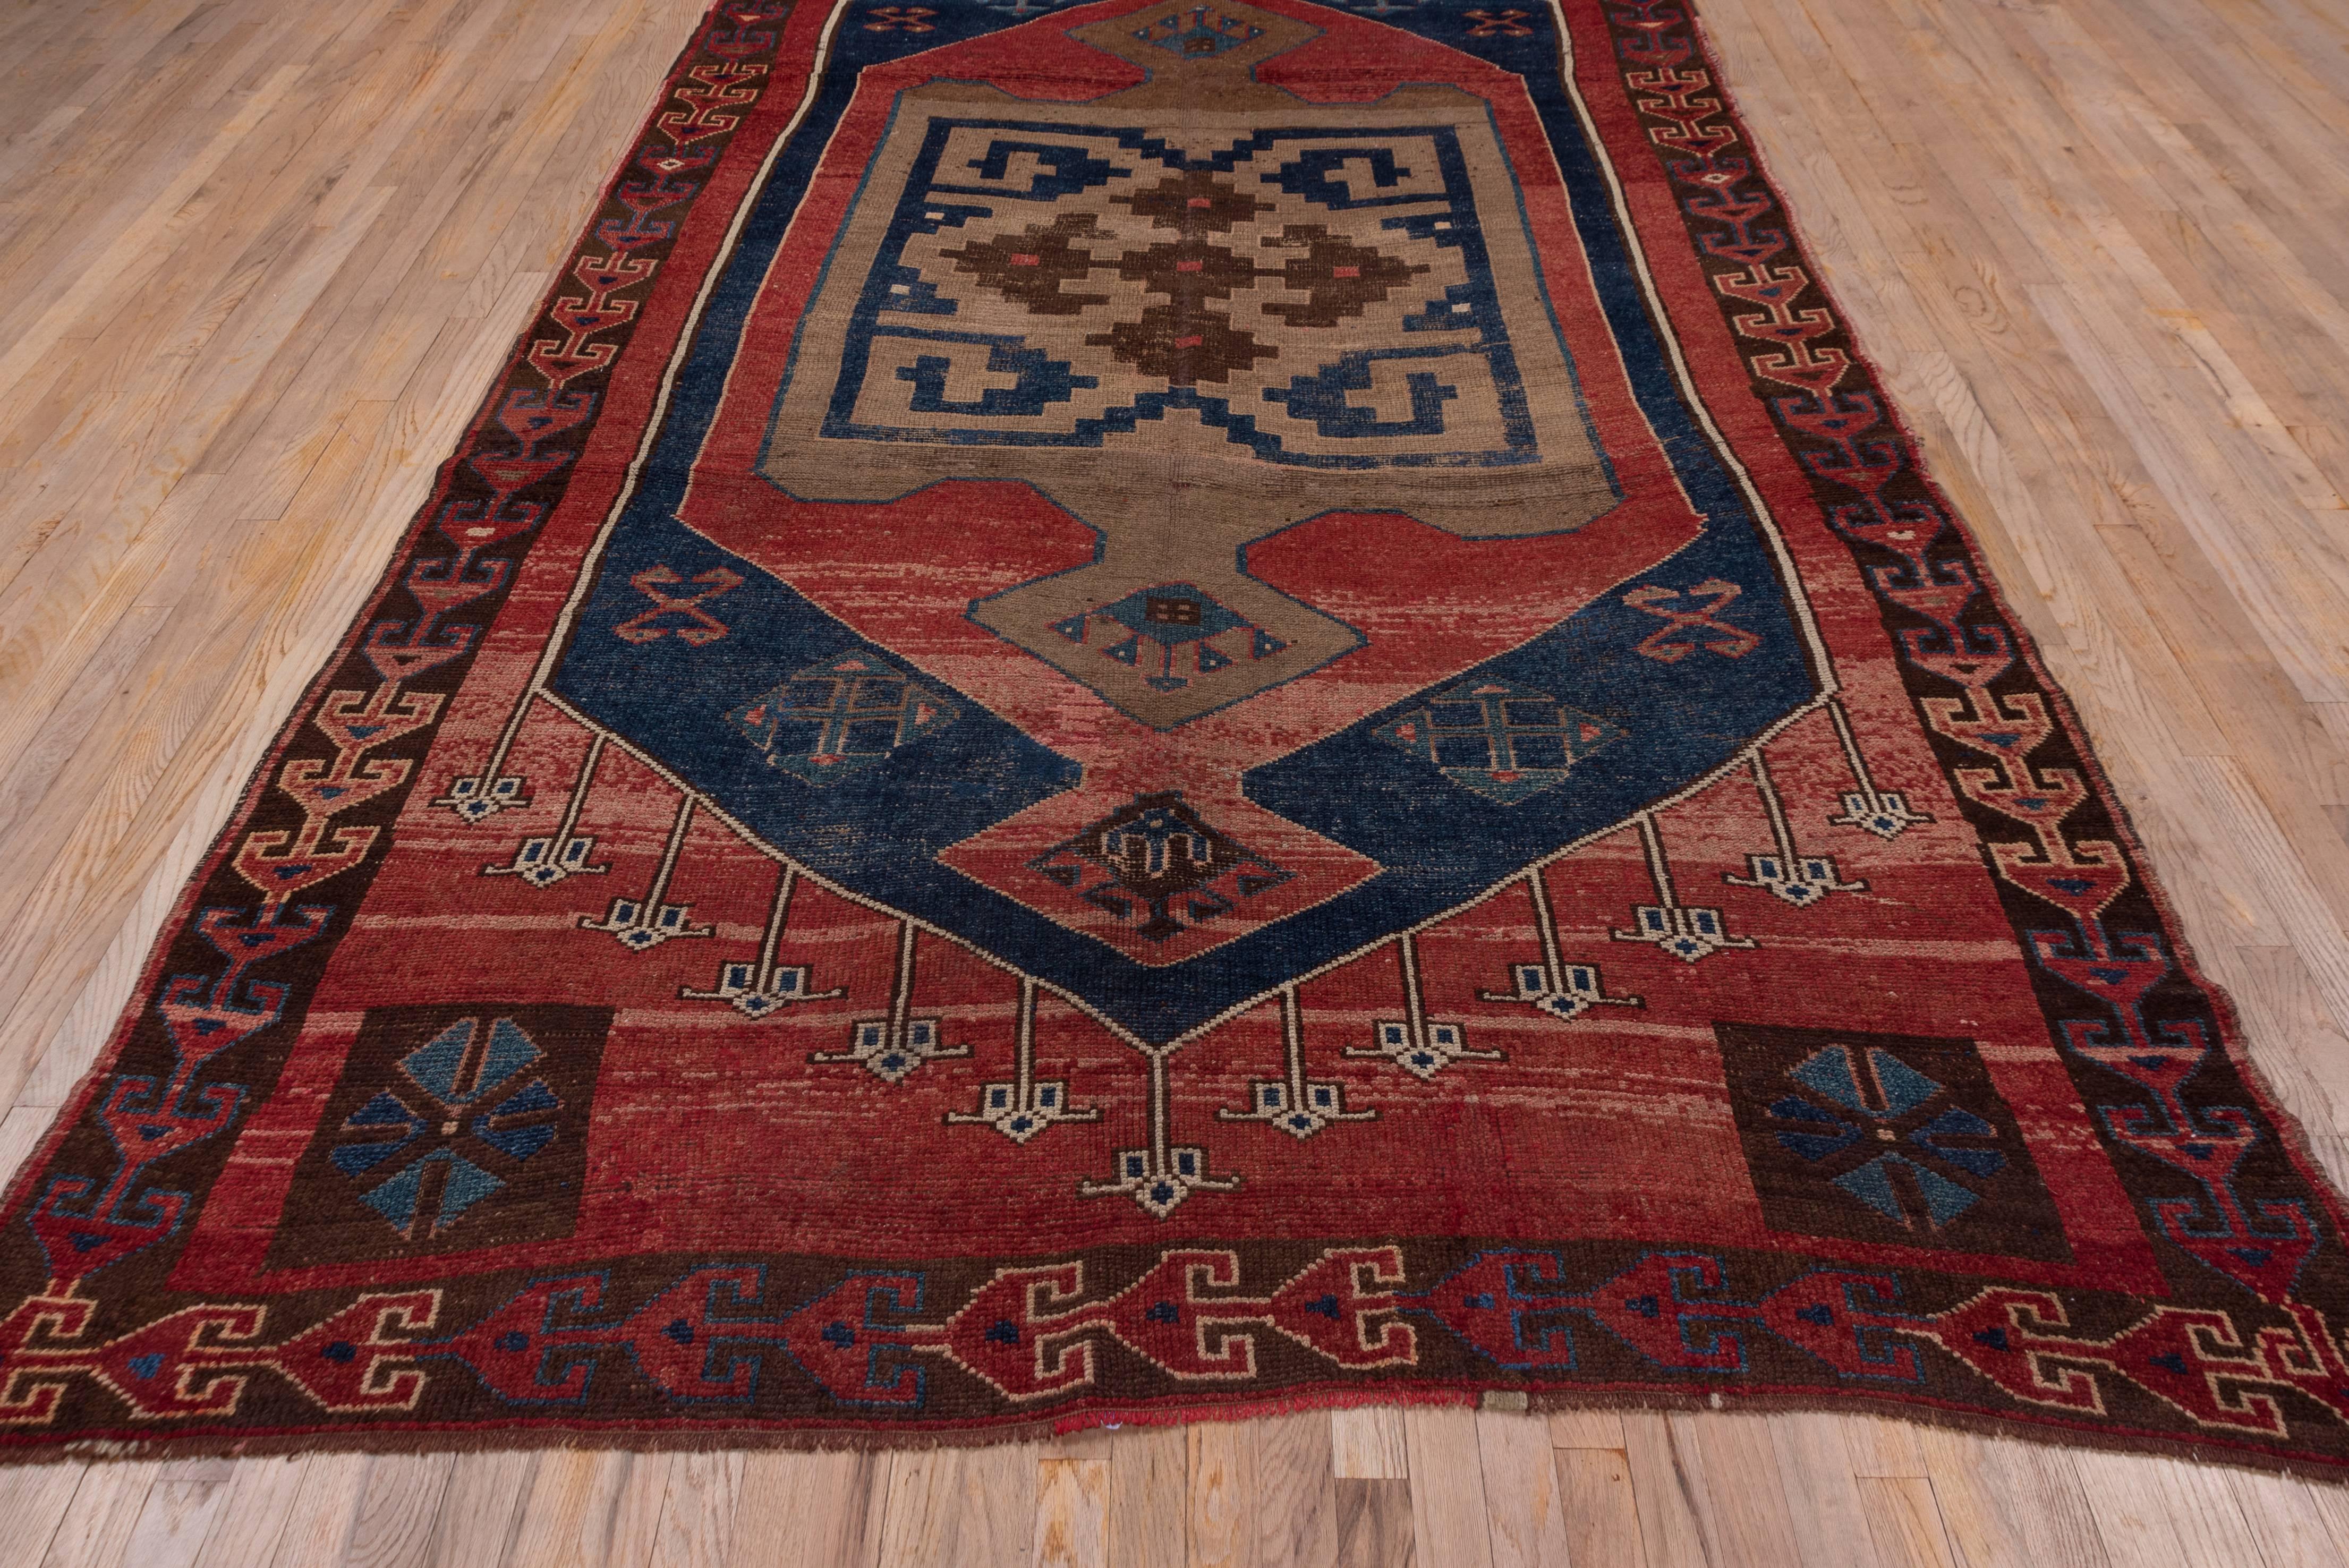 This boldly geometric long carpet features a red field with dark blue hexagonal subfield enclosing a pendant oblong red medallion and an olive inner medallion with an enormous reciprocal pattern in red and dark blue. The dark brown single border